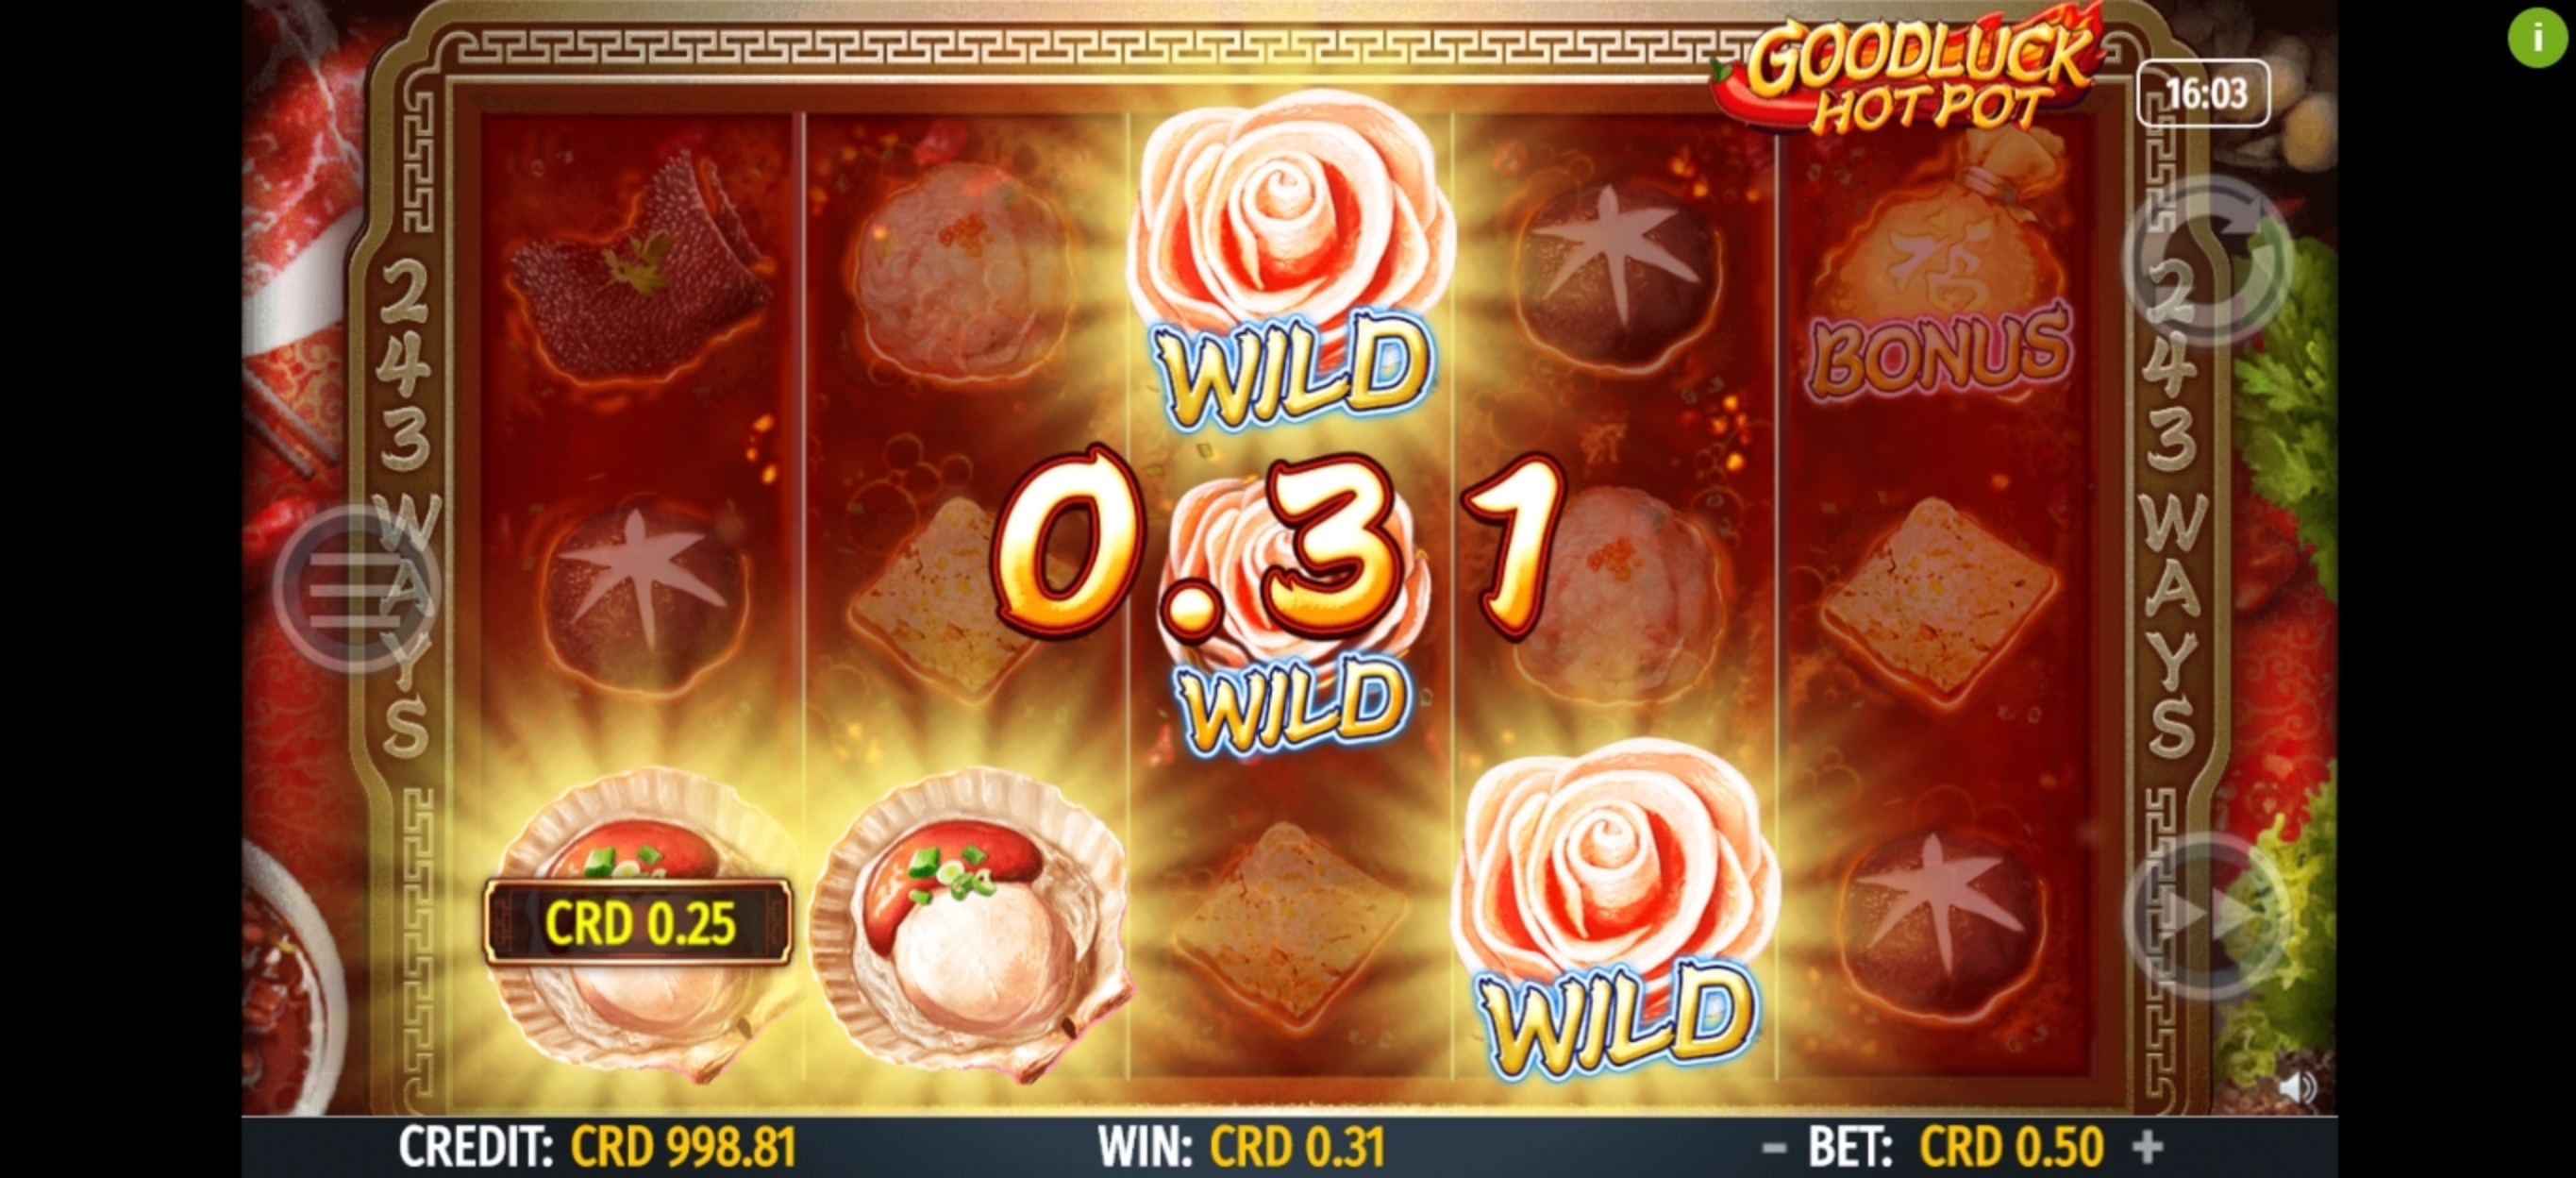 Win Money in Goodluck Hot Pot Free Slot Game by Octavian Gaming